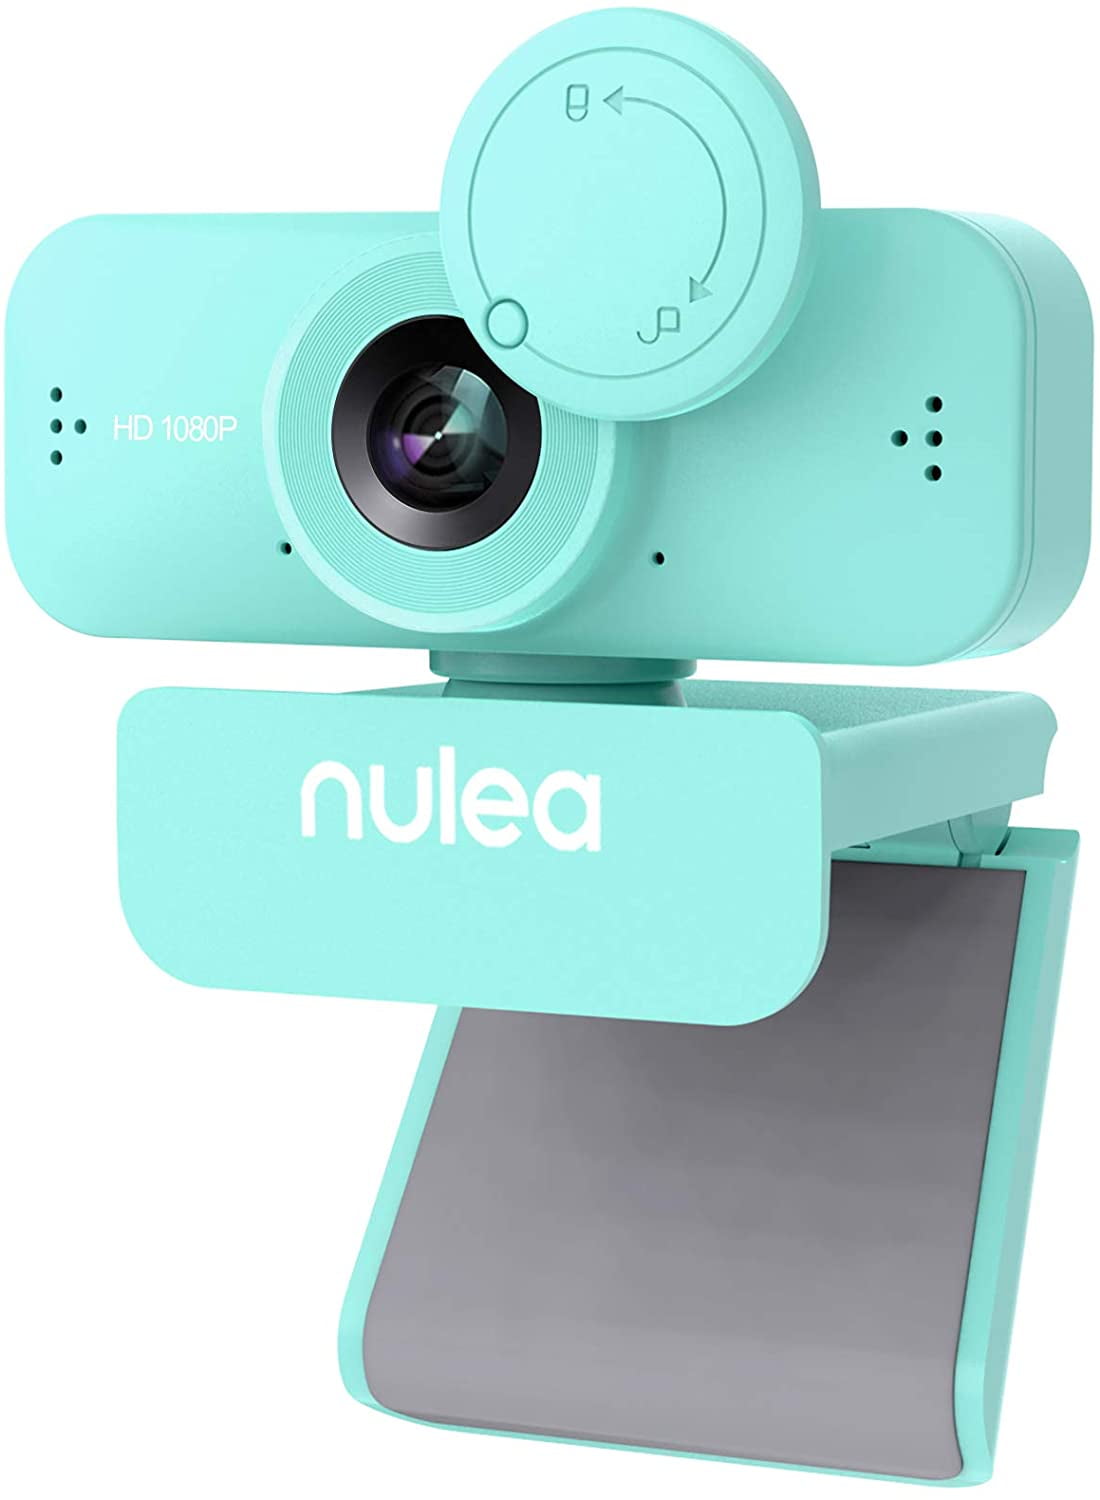 Nulea HD Webcam 1080P with Microphone for PC/Laptop Camera, Computer USB  Camera with Privacy Cover for Video Calling, Online Classes, Conference,  Works with Skype, Zoom, Facetime 